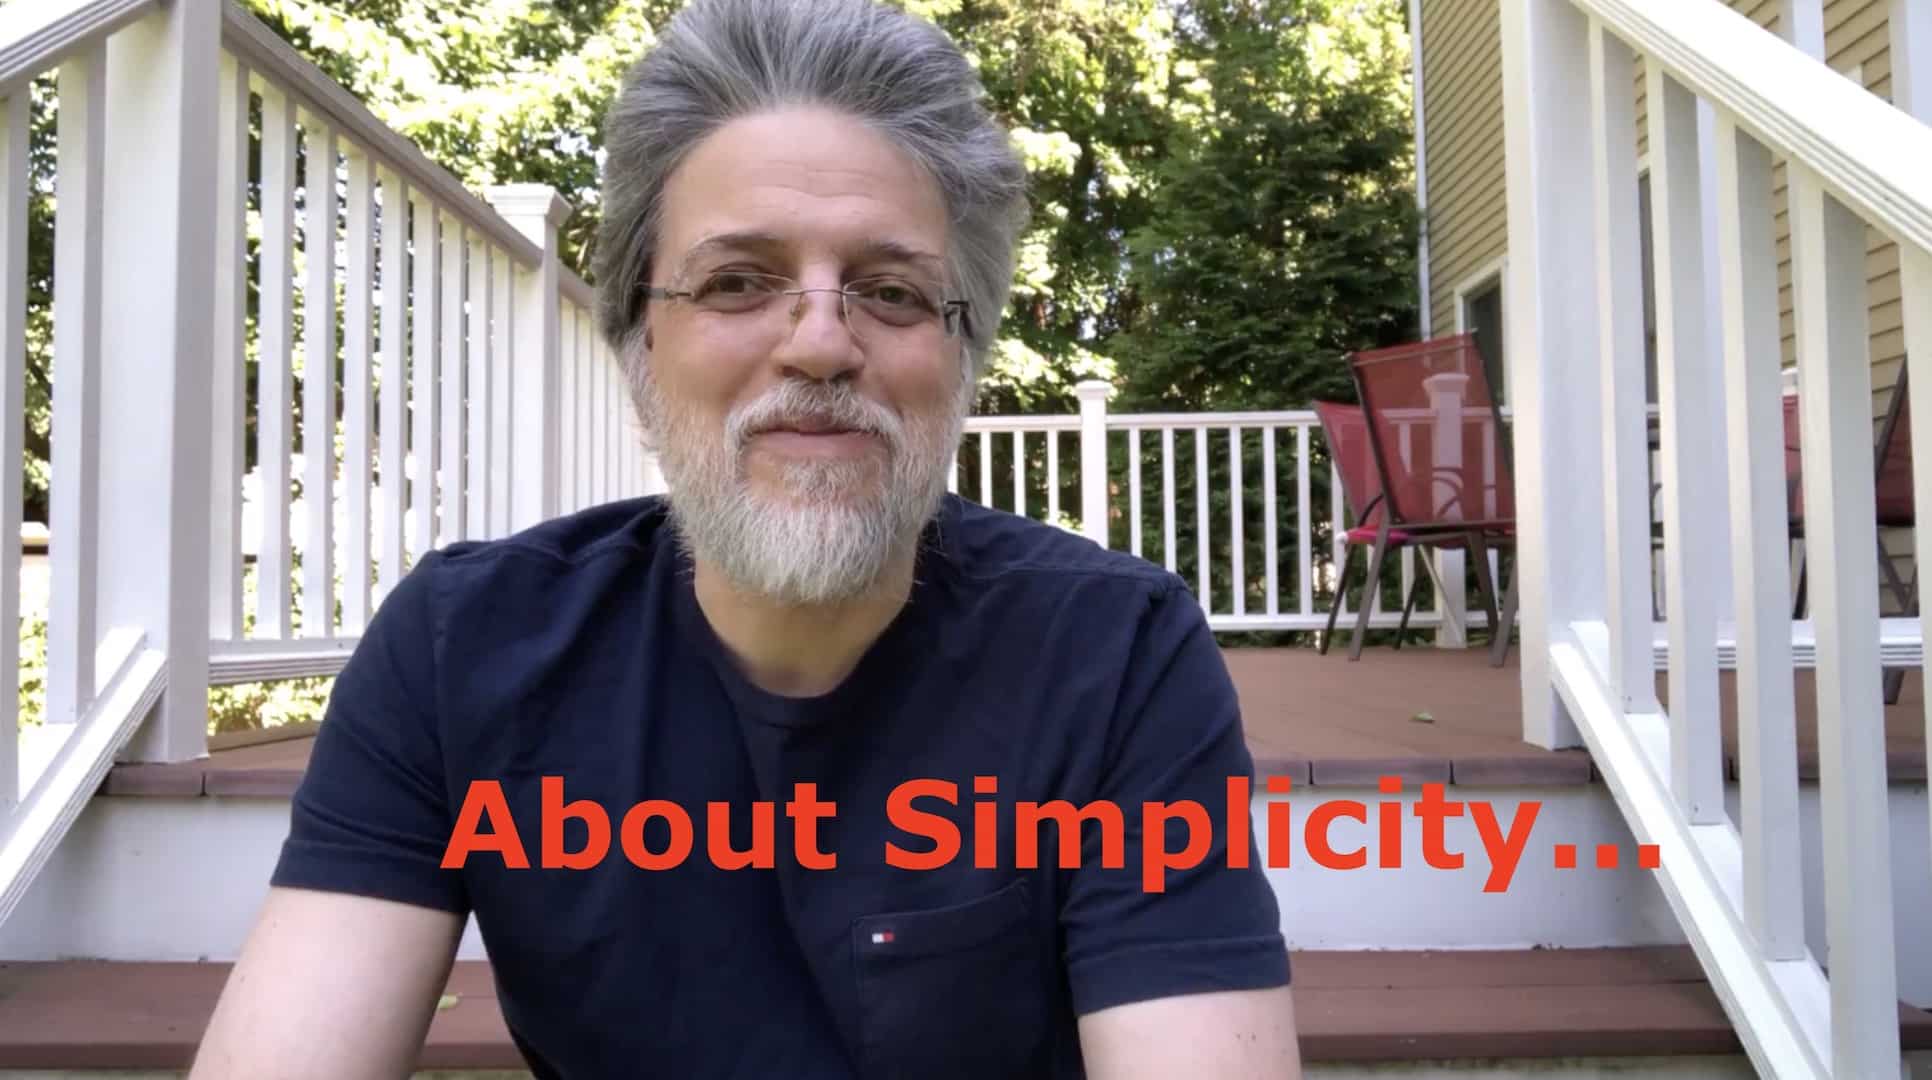 VIDEO: About Simplicity